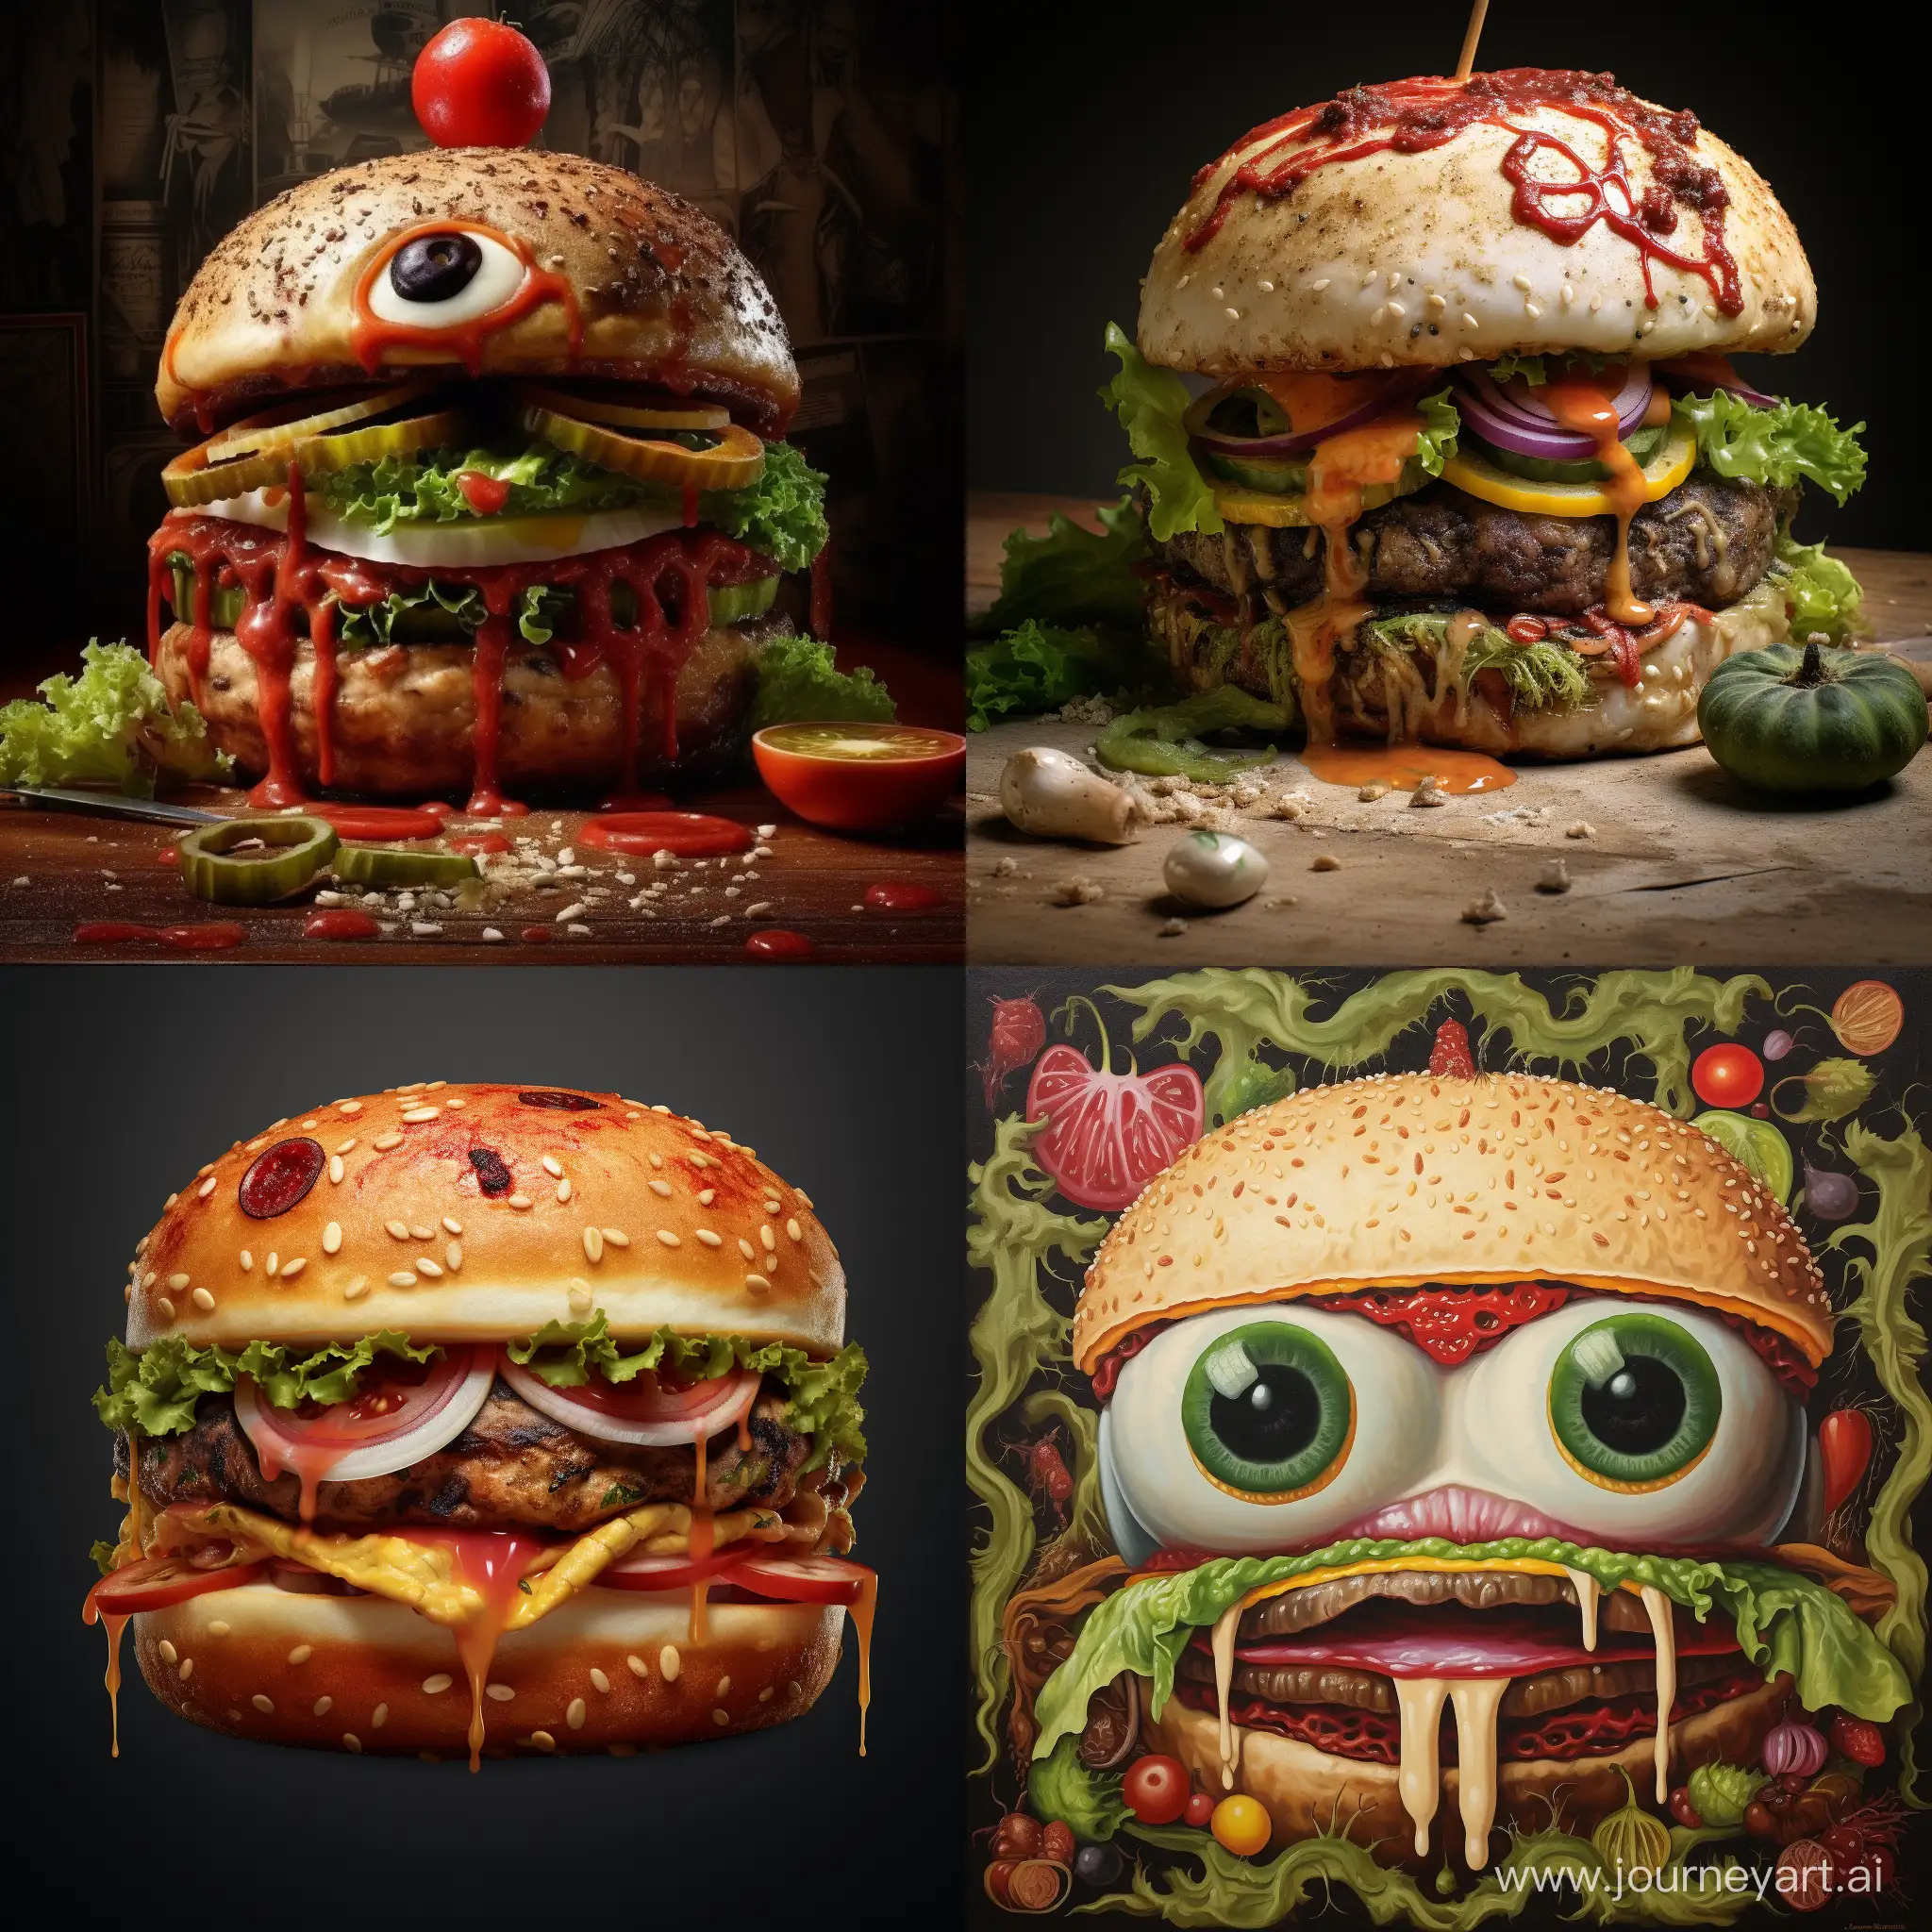 Quirky-Burger-with-Expressive-Eyes